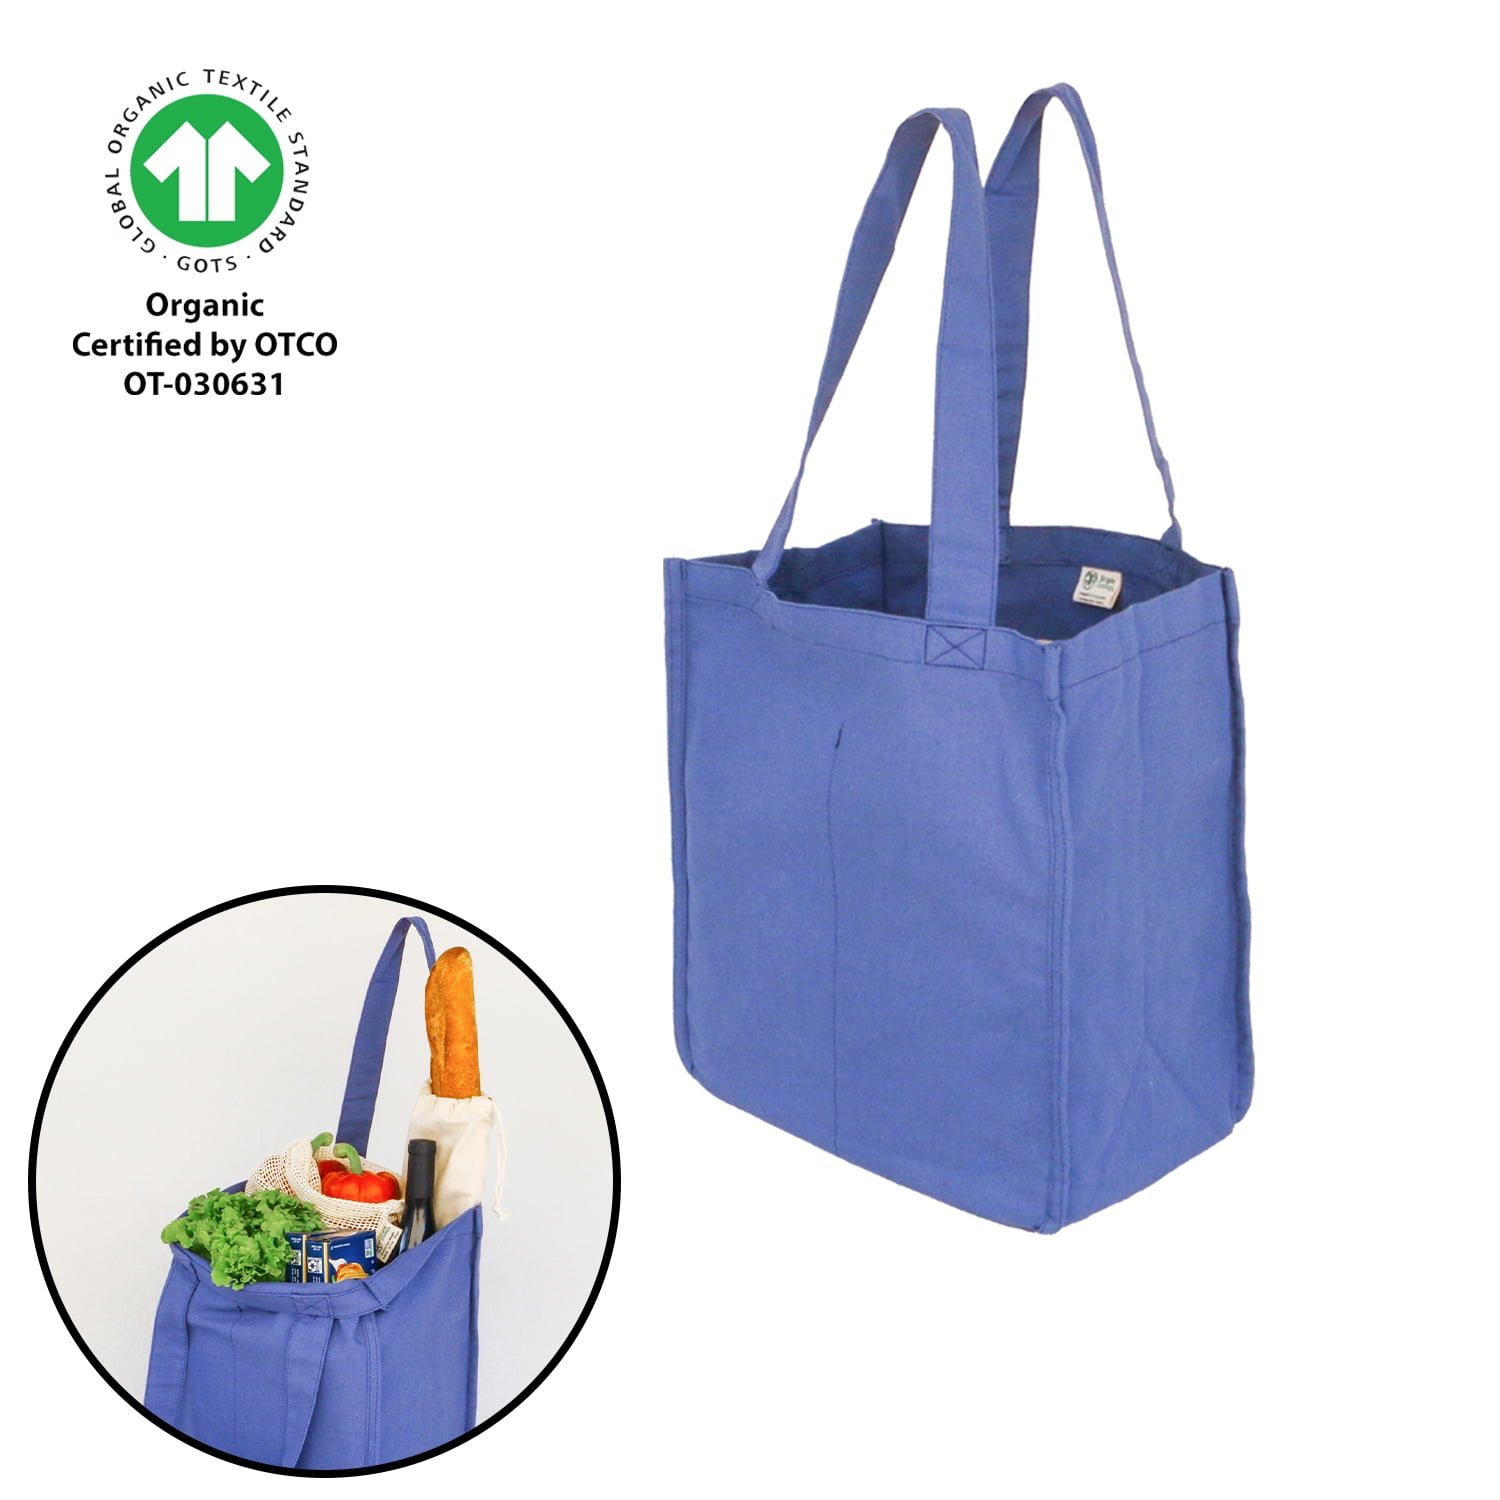 Simple Ecology Organic Cotton Deluxe Reusable Grocery Shopping Bag; Bottle  Sleeves, Rigid Bottom Support (UPDATED DESIGN)